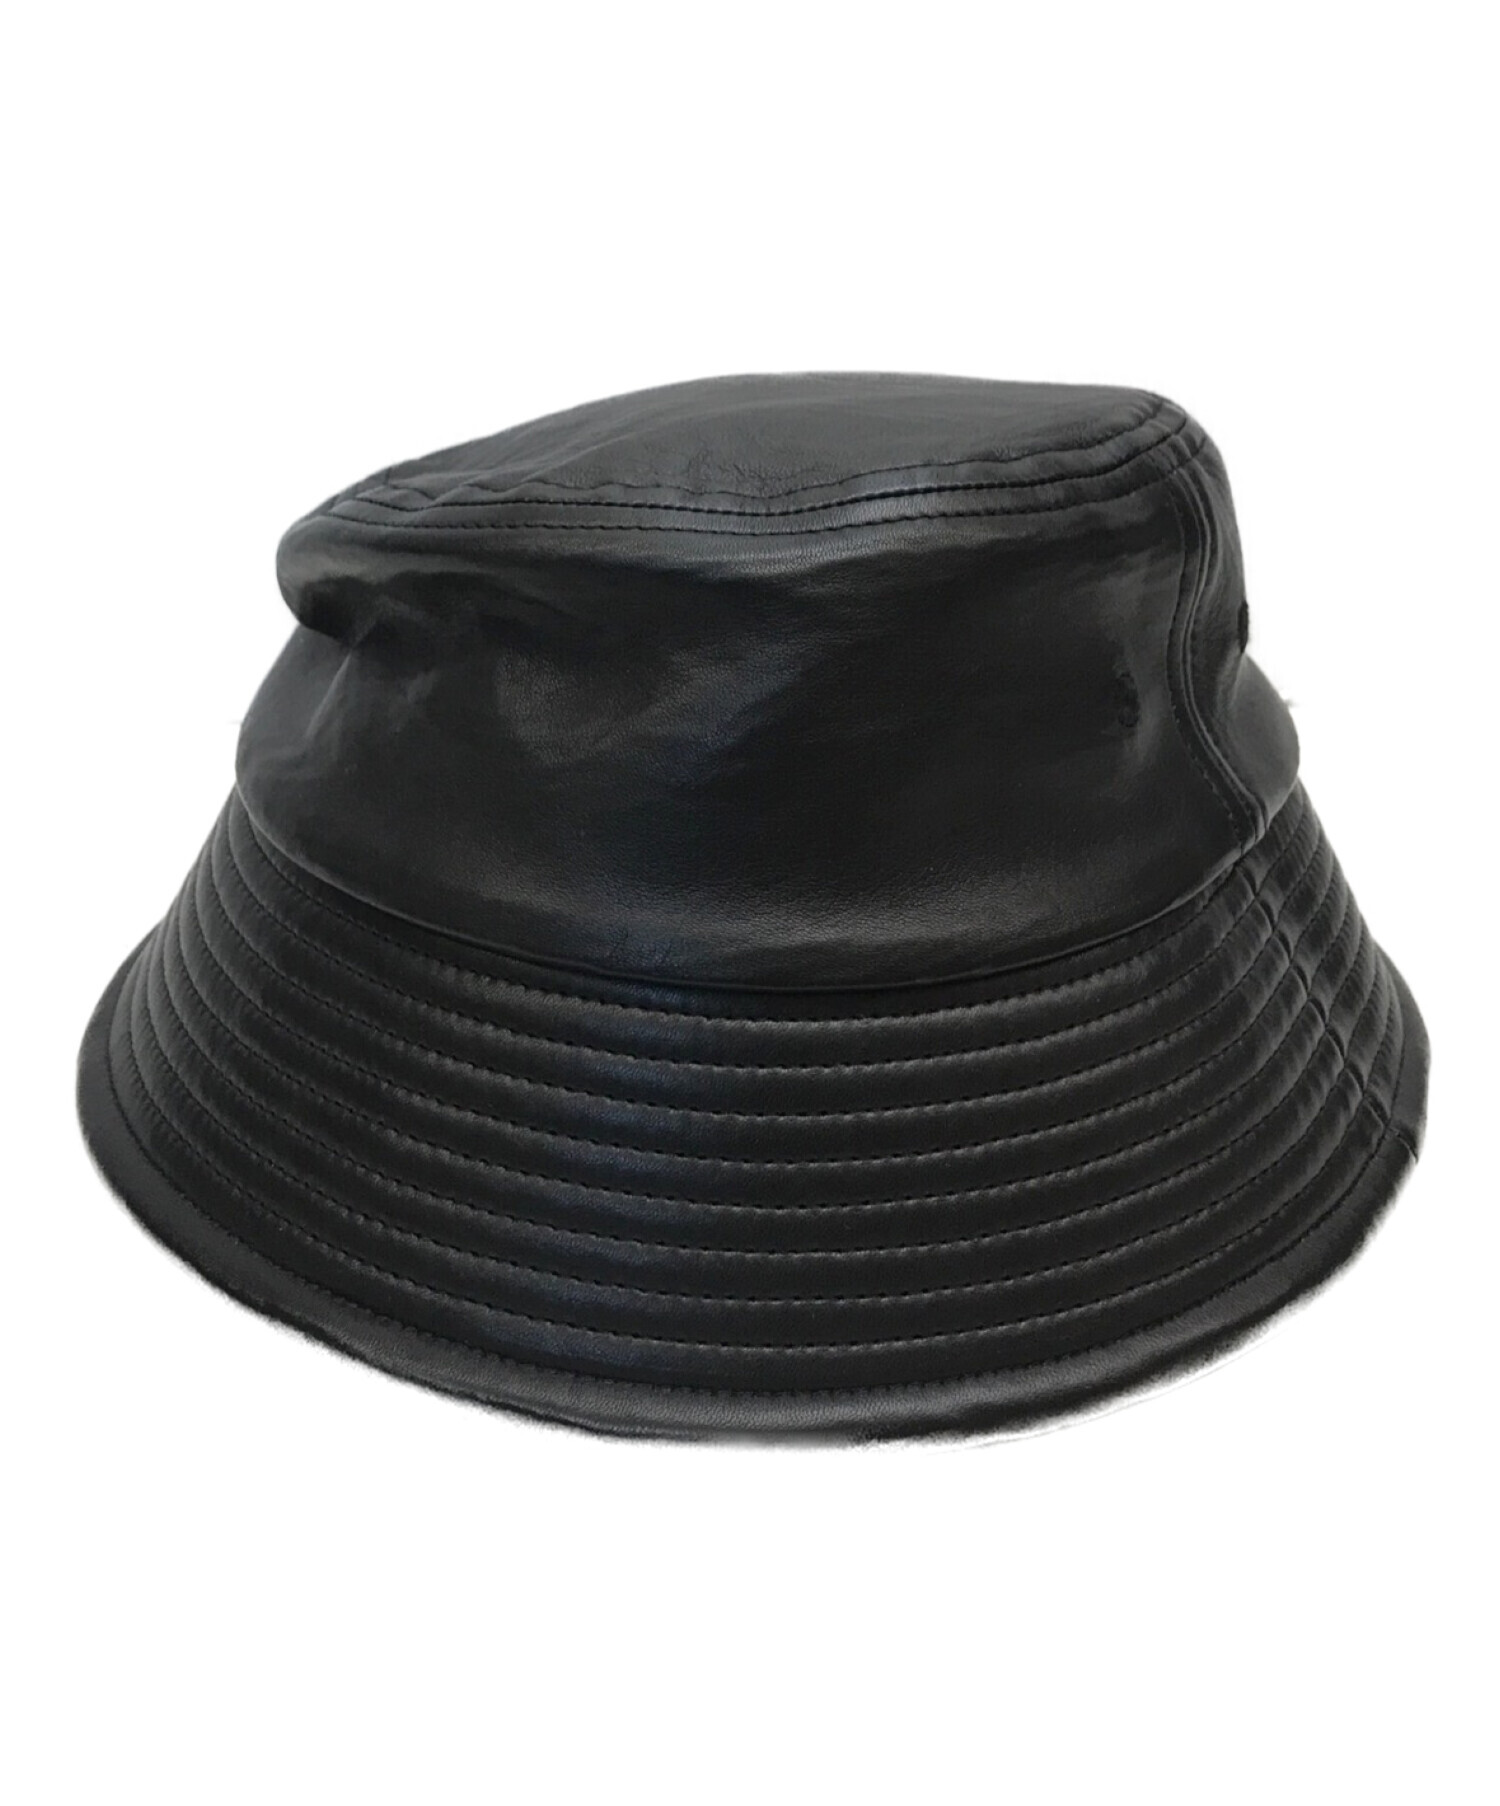 COOTIE / 21ss Leather Bucket Hat レザー ハット | www.jarussi.com.br